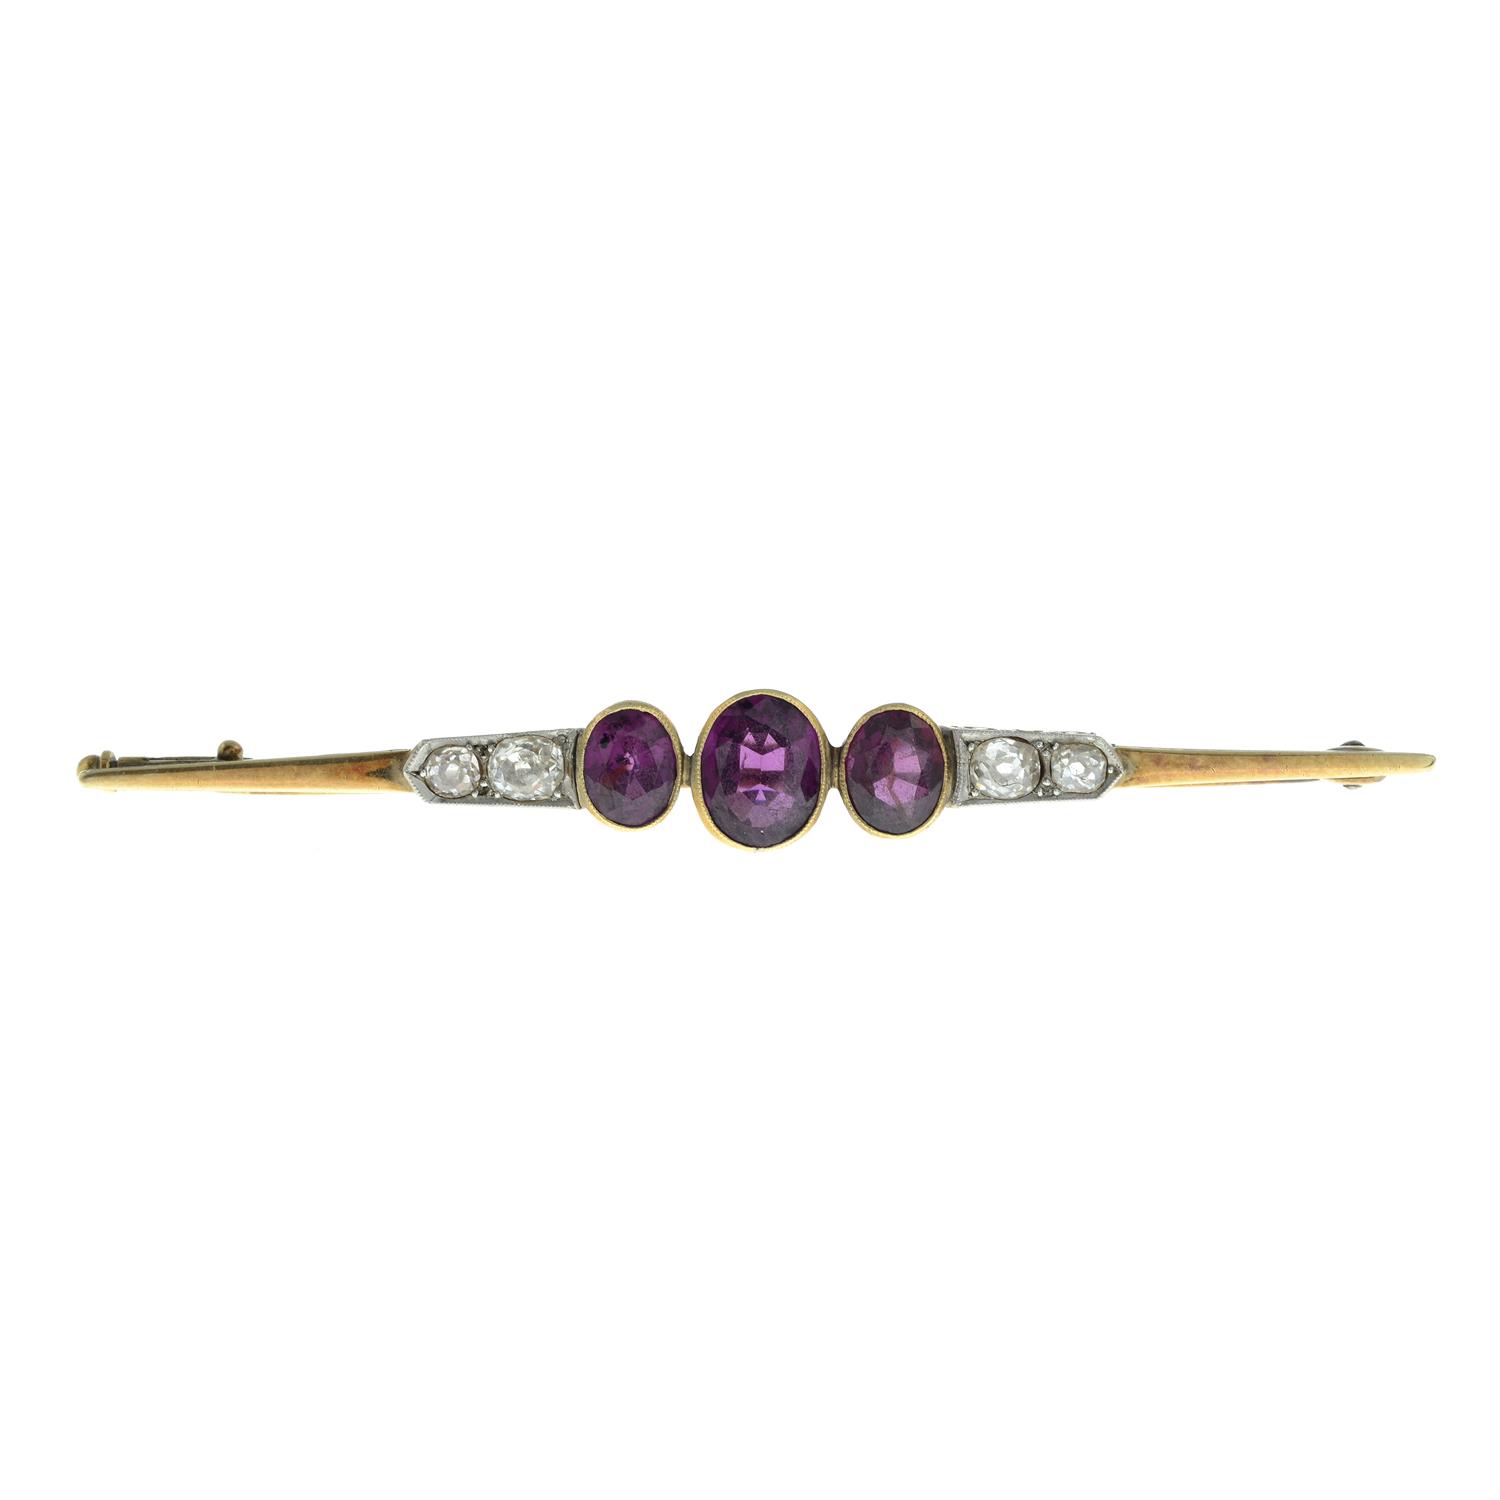 An early to mid 20th century 14ct gold garnet and old-cut diamond bar brooch. - Image 2 of 4